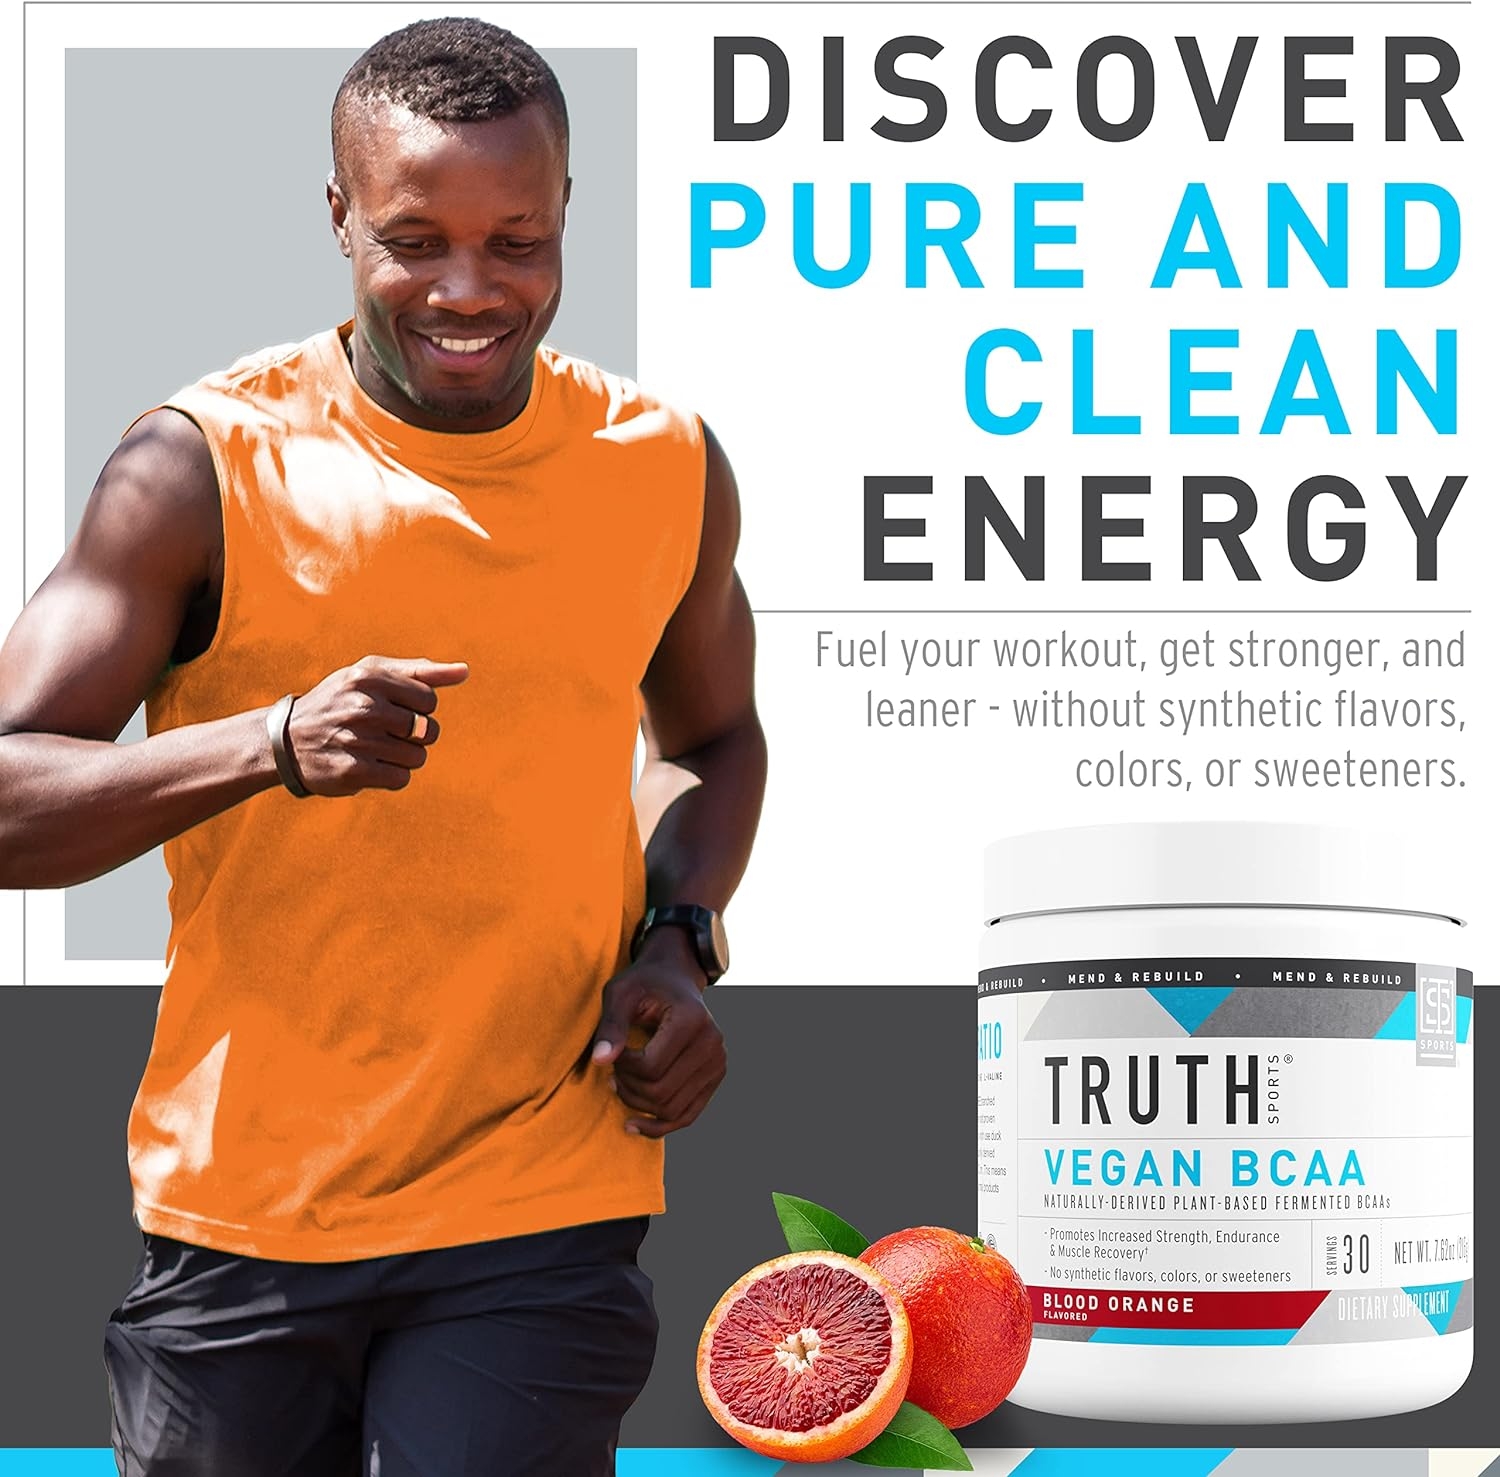 Truth Nutrition Fermented Vegan BCAA Powder- 2:1:1 Ratio All Natural Branched Chain Amino Acids for Energy, Muscle Building, Post Workout Recovery and Endurance (Blood Orange, 30 Servings)